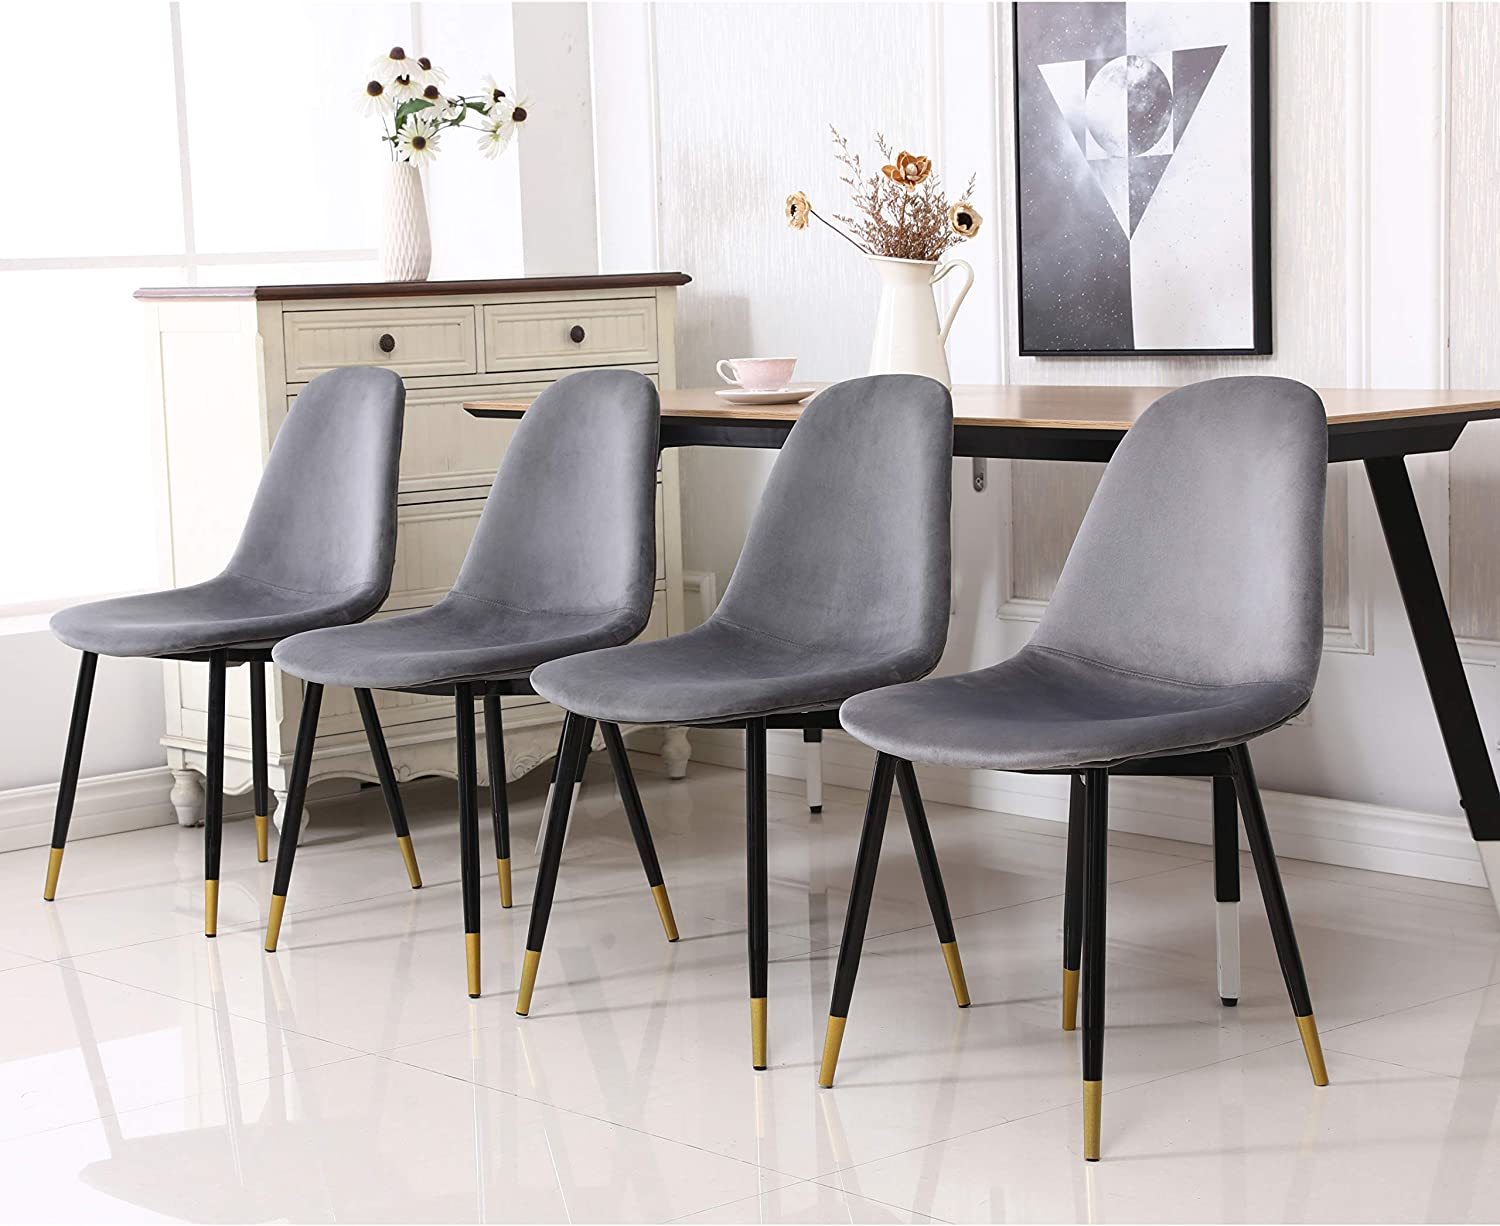 Roundhill Furniture Lassan Contemporary Fabric Dining Chairs, Set of 4, Gray - $186.99